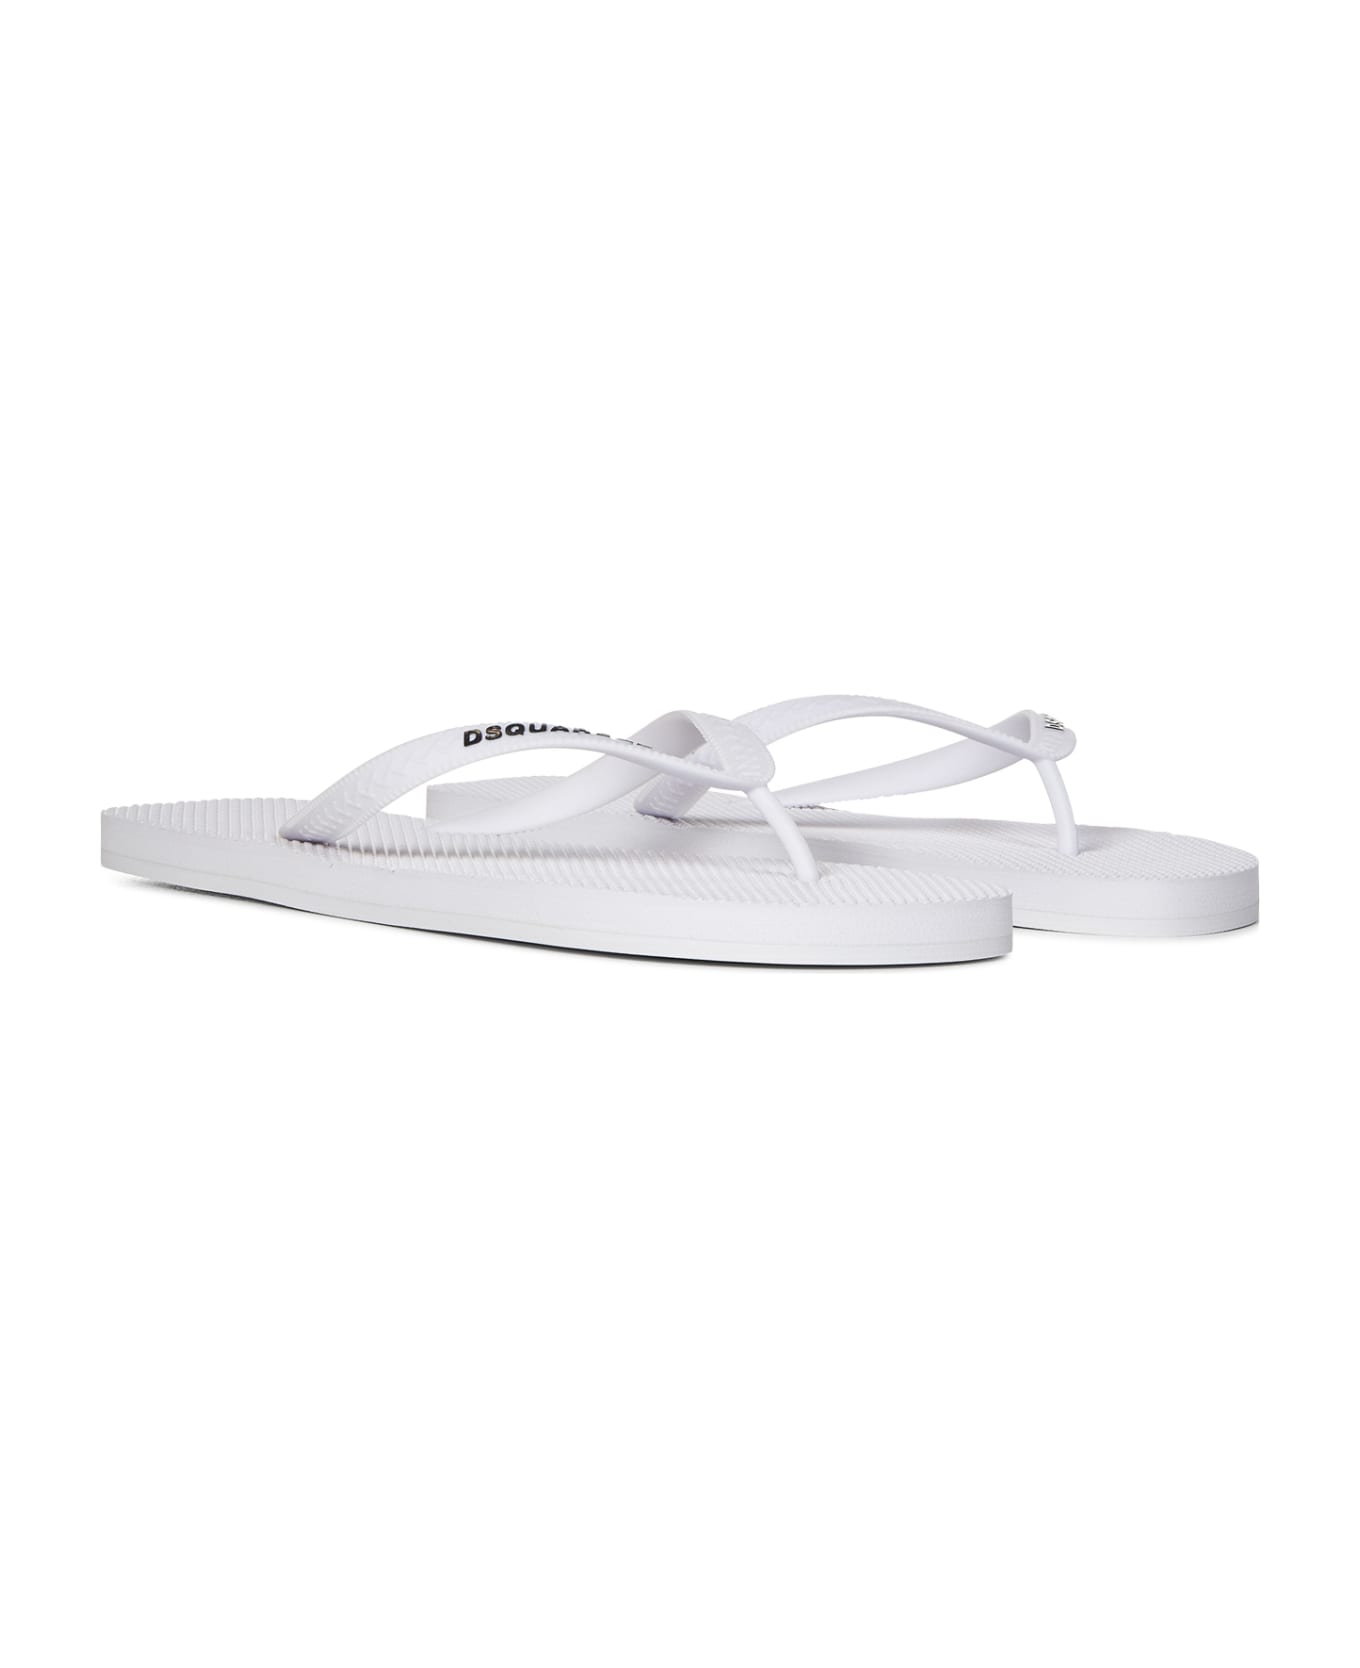 Dsquared2 Flip Flops - White その他各種シューズ